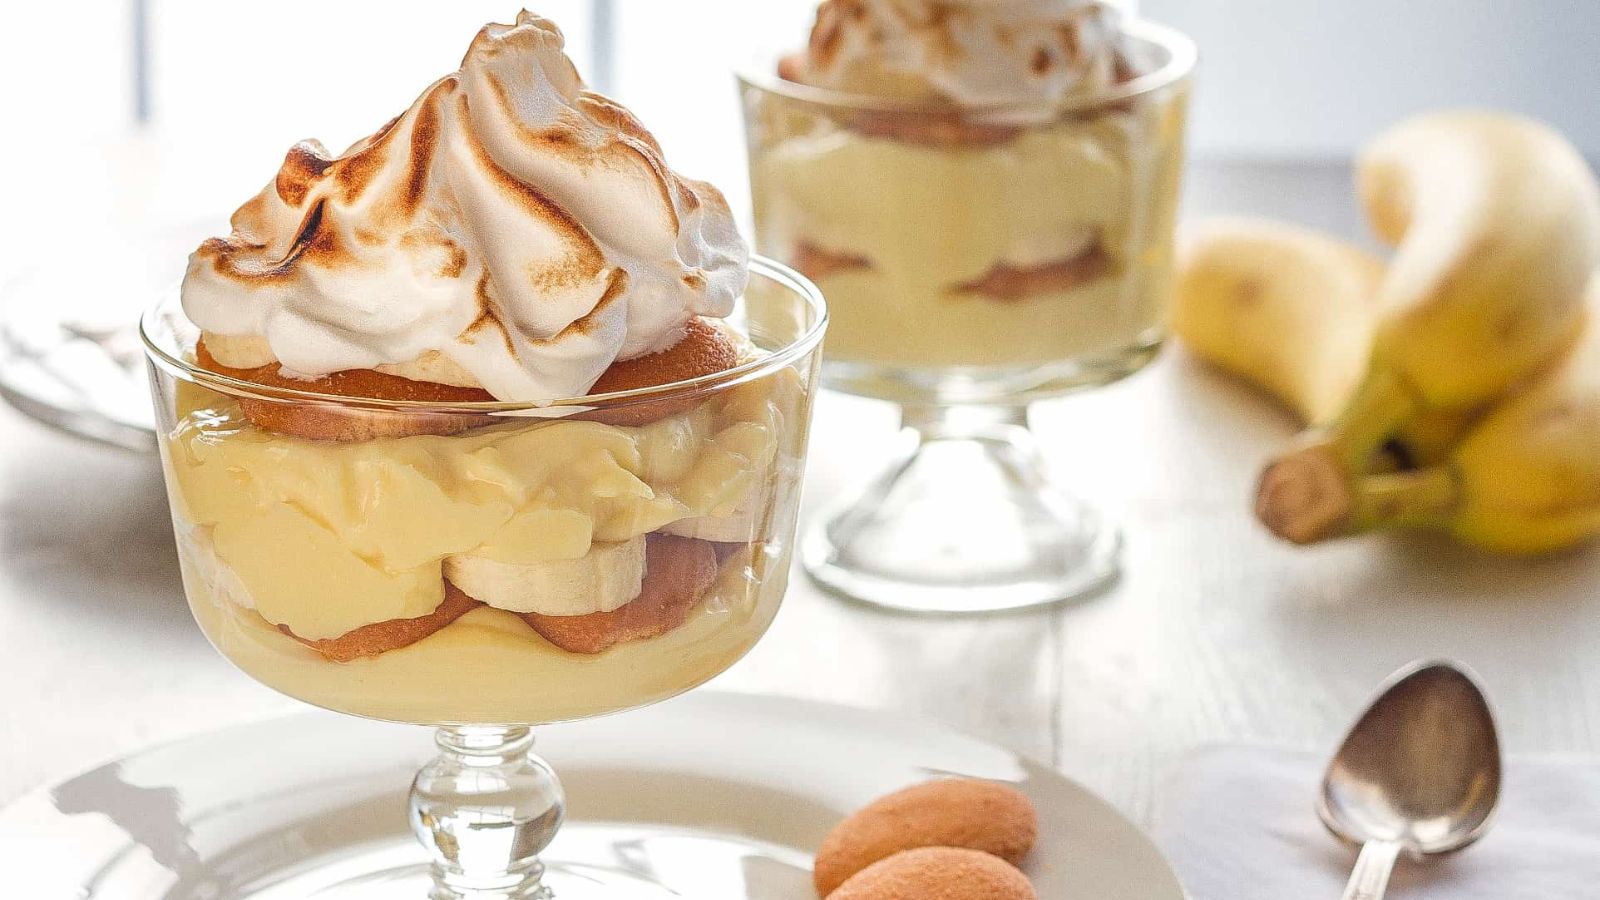 How Long can Banana Pudding Last in the Fridge?